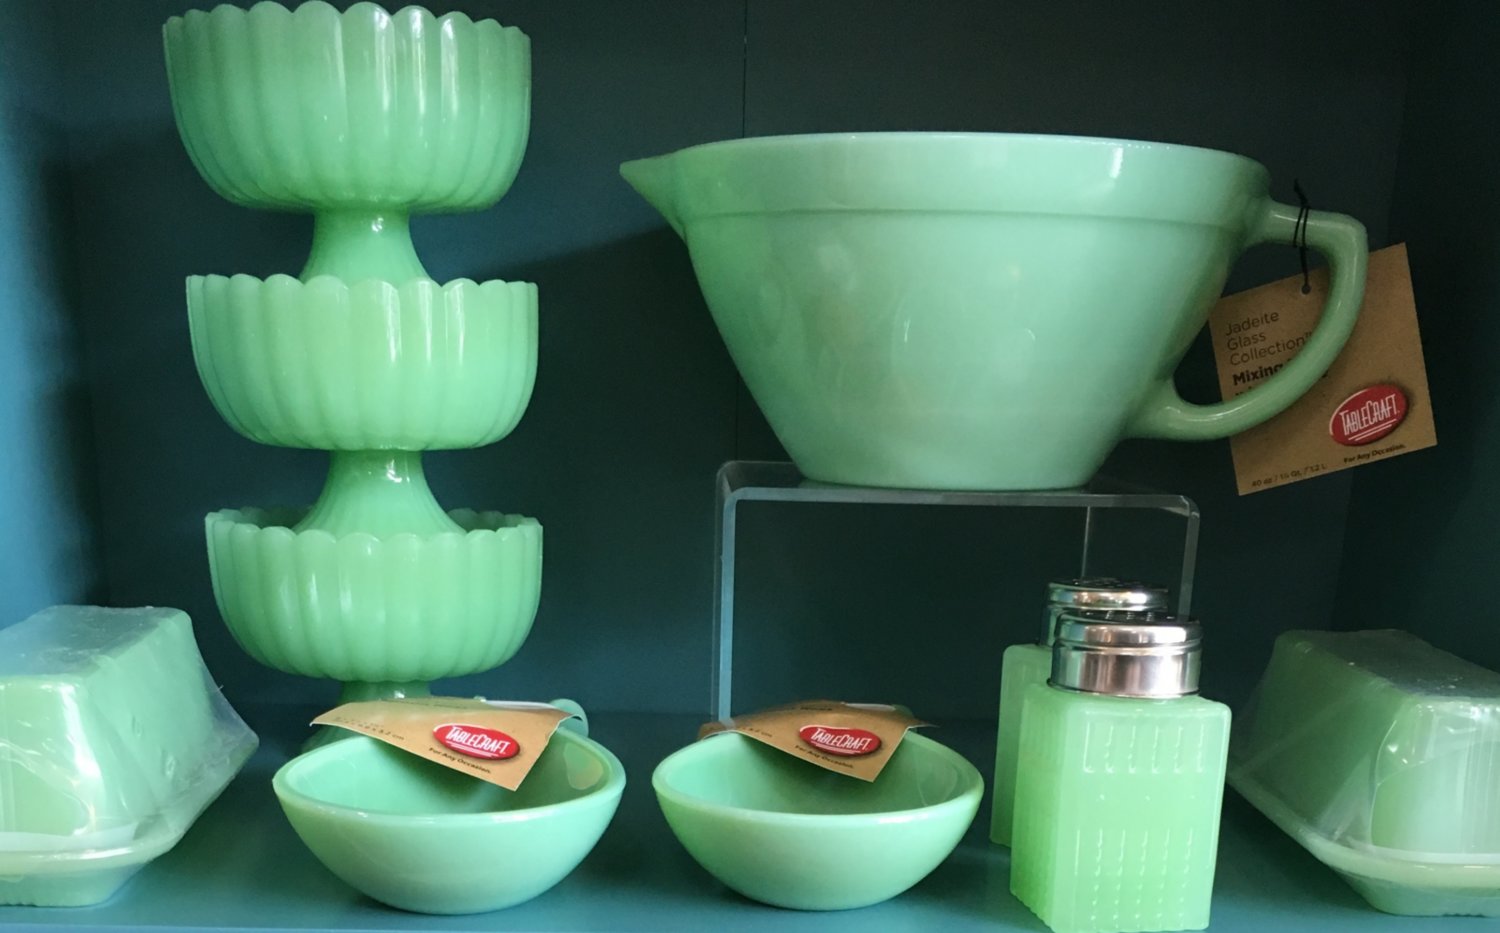 Panoply: Jadeite Collection - Part 1 of 2: Kitchenware